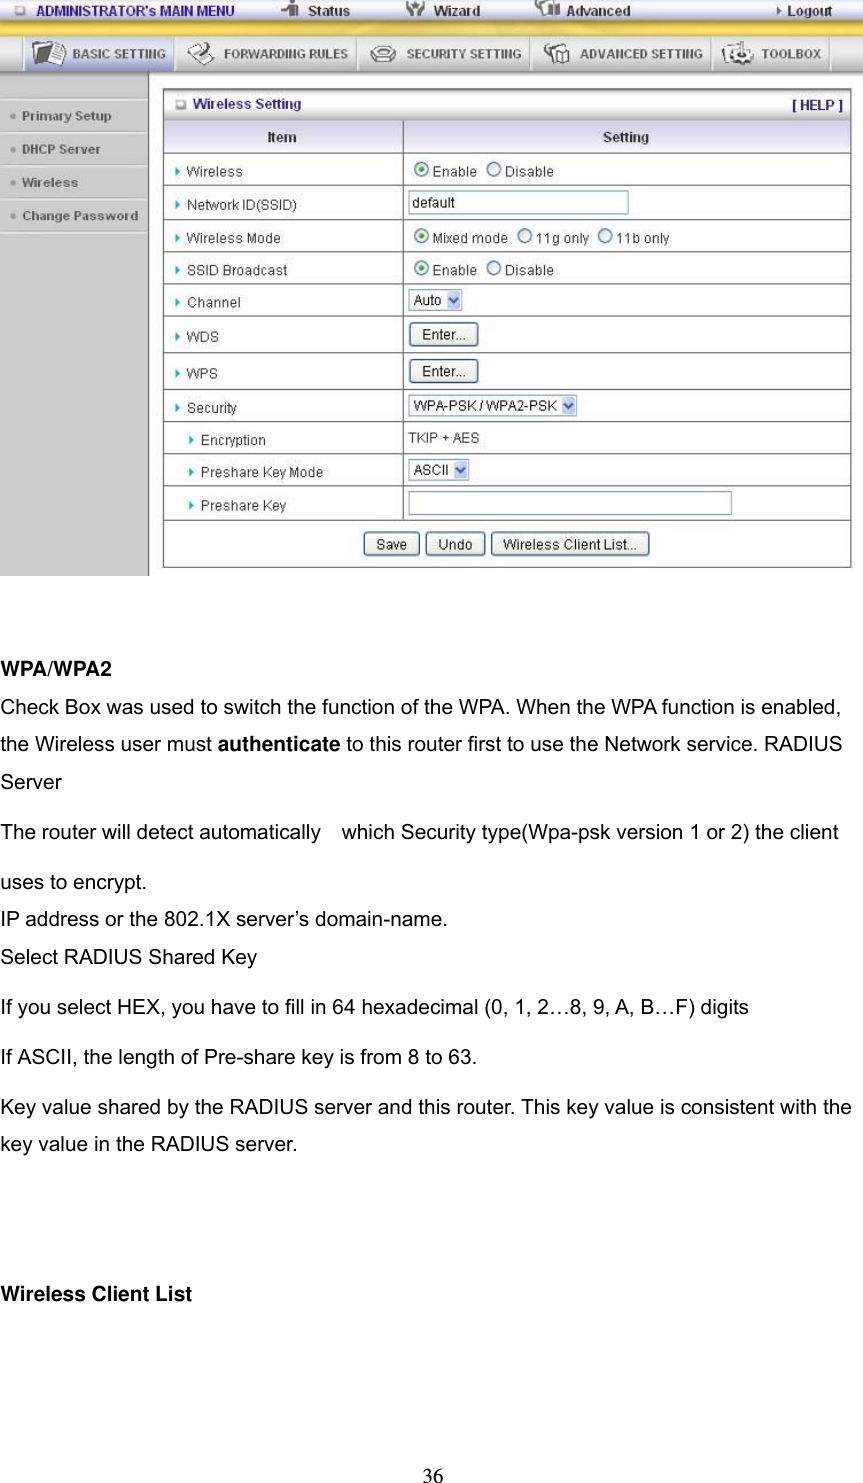  36  WPA/WPA2 Check Box was used to switch the function of the WPA. When the WPA function is enabled, the Wireless user must authenticate to this router first to use the Network service. RADIUS Server The router will detect automatically    which Security type(Wpa-psk version 1 or 2) the client   uses to encrypt. IP address or the 802.1X server’s domain-name.   Select RADIUS Shared Key If you select HEX, you have to fill in 64 hexadecimal (0, 1, 2…8, 9, A, B…F) digits If ASCII, the length of Pre-share key is from 8 to 63. Key value shared by the RADIUS server and this router. This key value is consistent with the key value in the RADIUS server.   Wireless Client List   